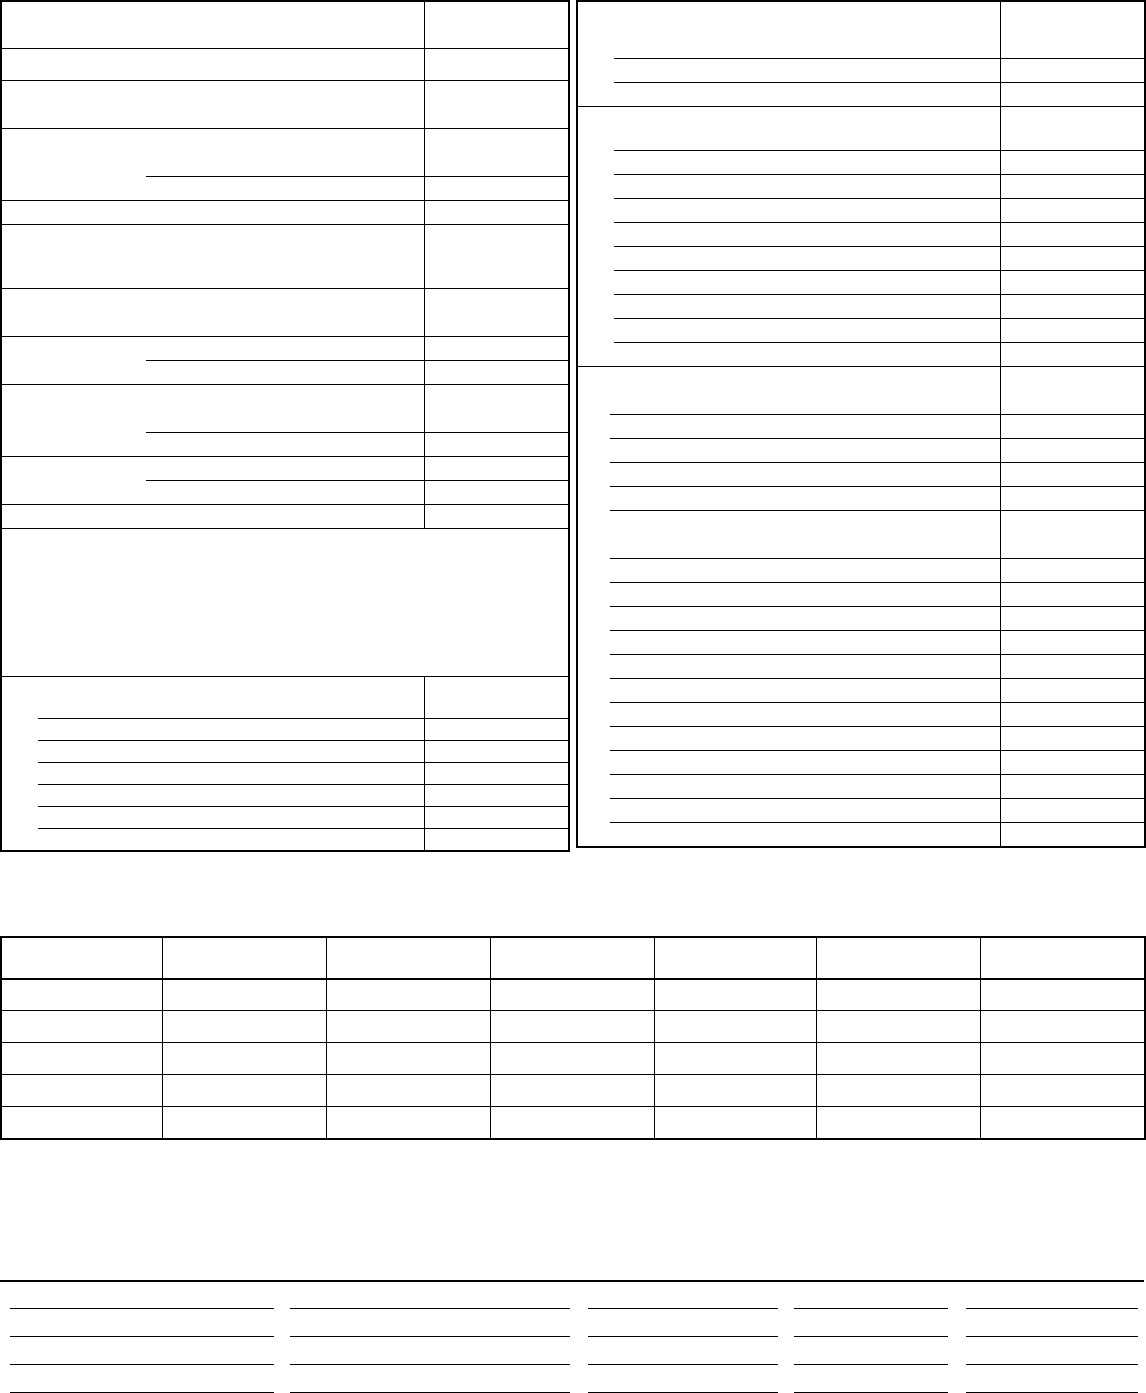 Download Real Estate Spreadsheet Template for Free